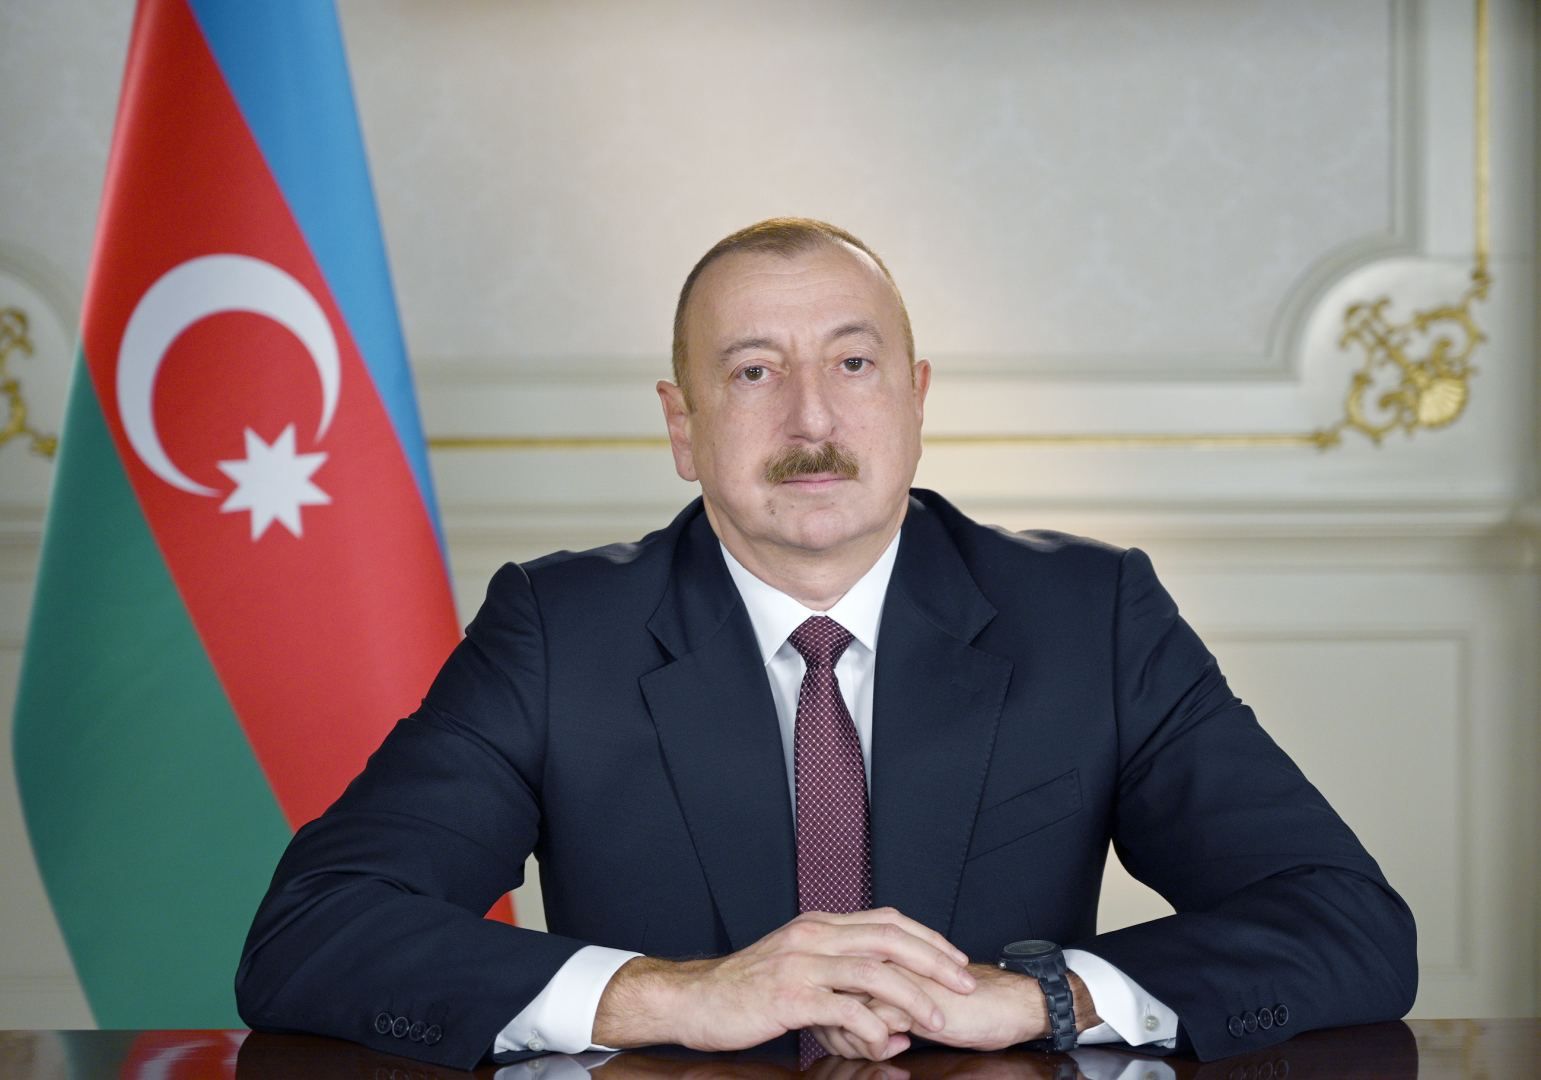 Composition of Azerbaijan's Civil Service Management Board amended following presidential order